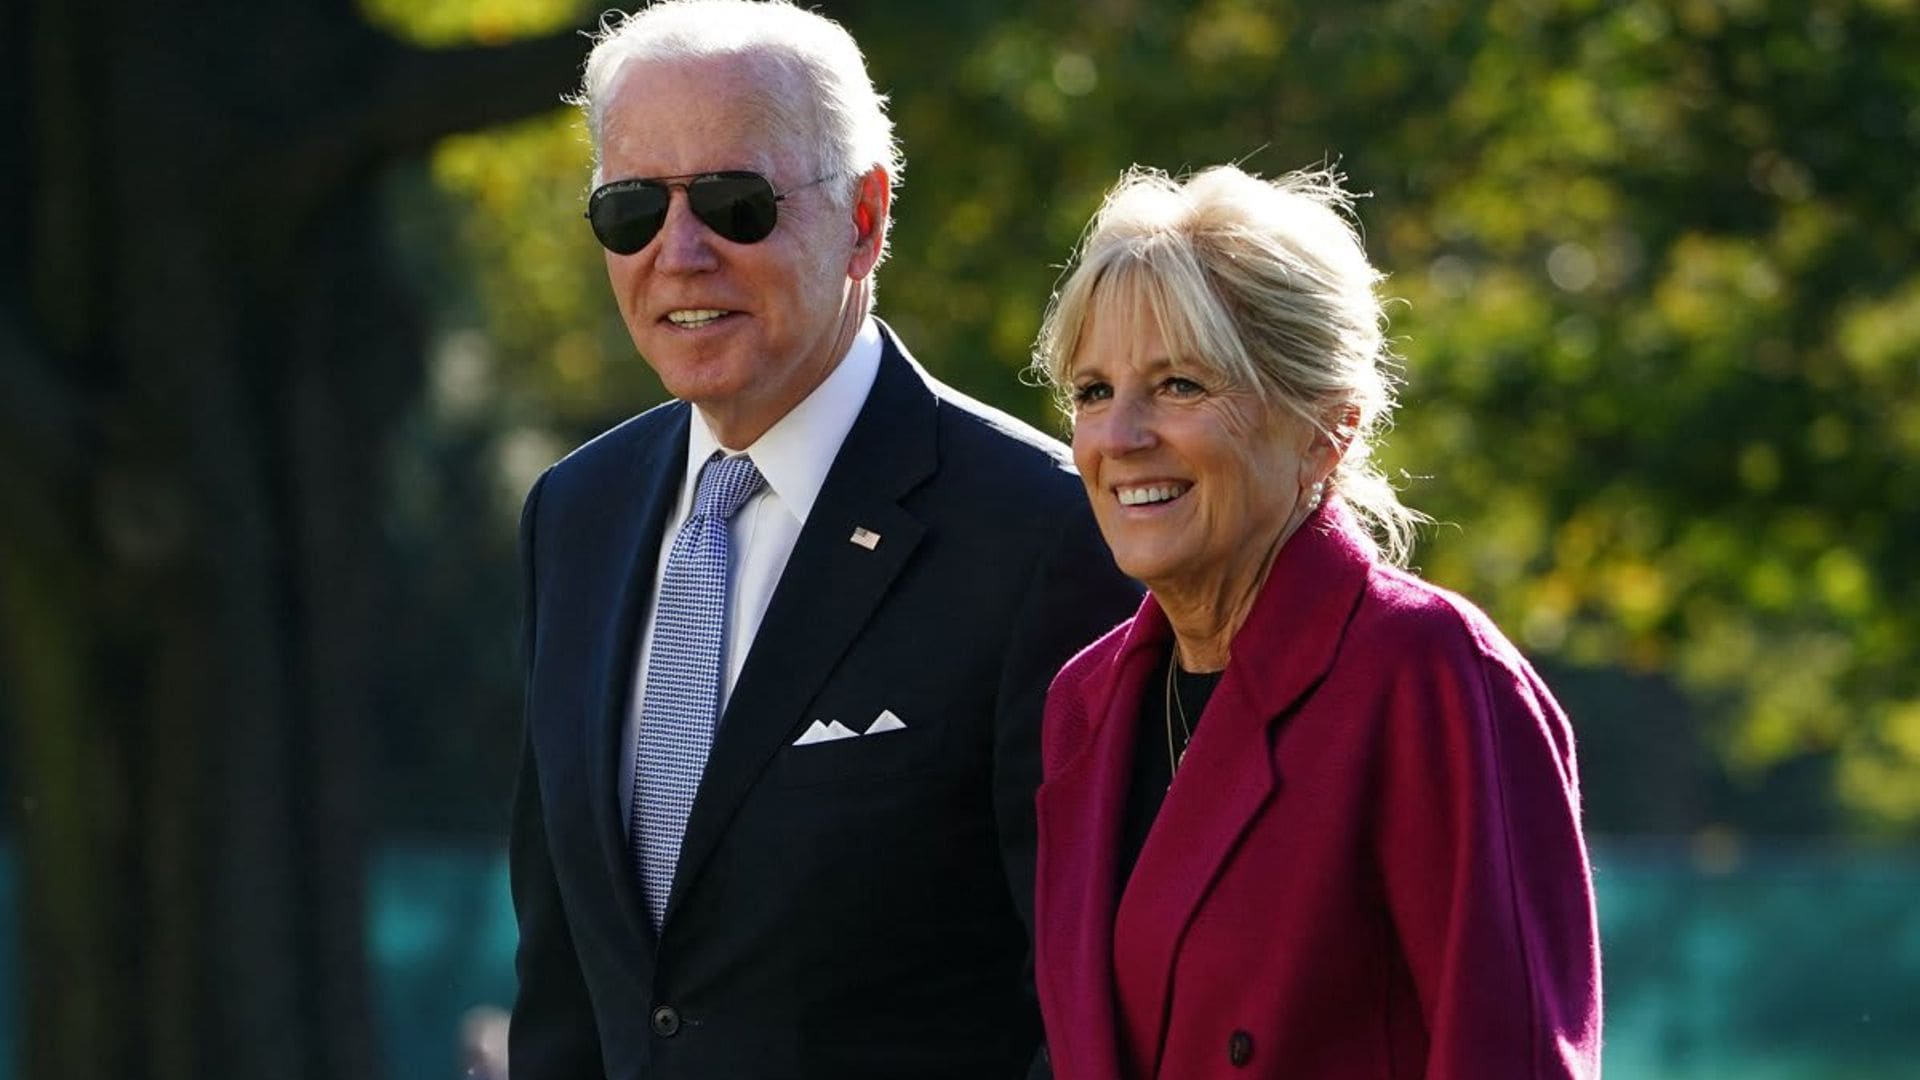 Is President Joe Biden and First Lady Jill Biden’s granddaughter getting married at the White House?